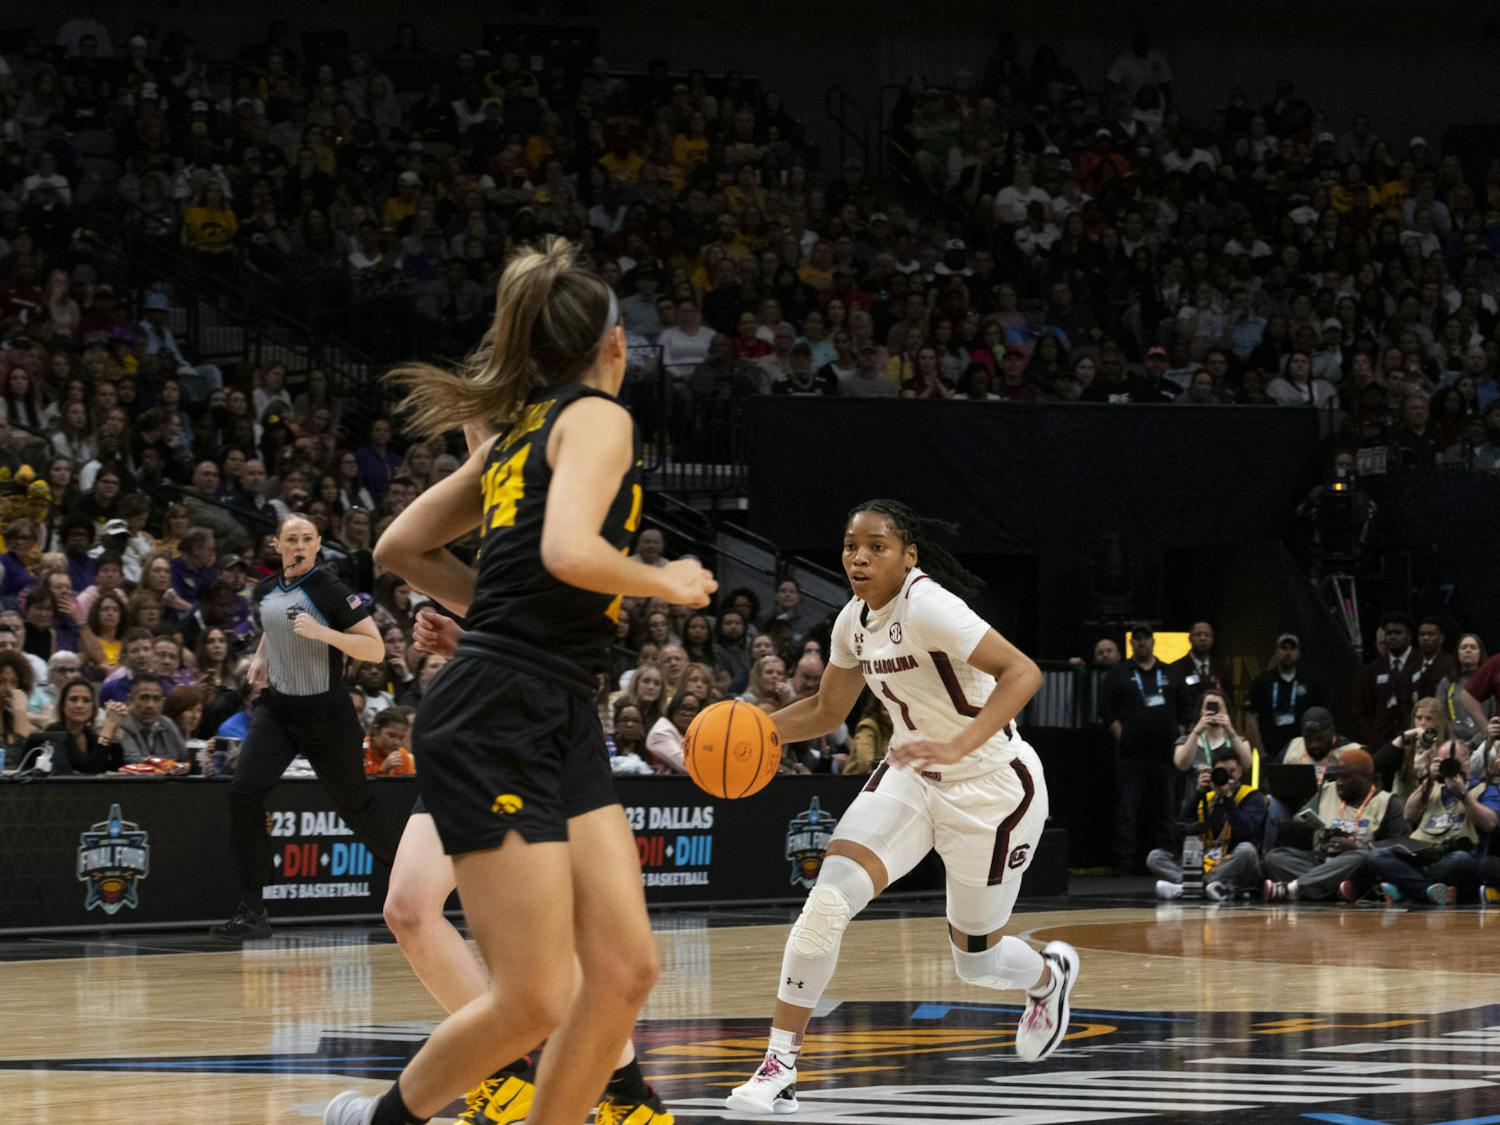 Senior guard Zia Cooke rushes down the court on a breakaway during the Final Four match between the University of South Carolina and the University of Iowa on March 31, 2023. Cooke put up 24 of the Gamecocks' 73 points, but the team was 4 points short of the win.&nbsp;